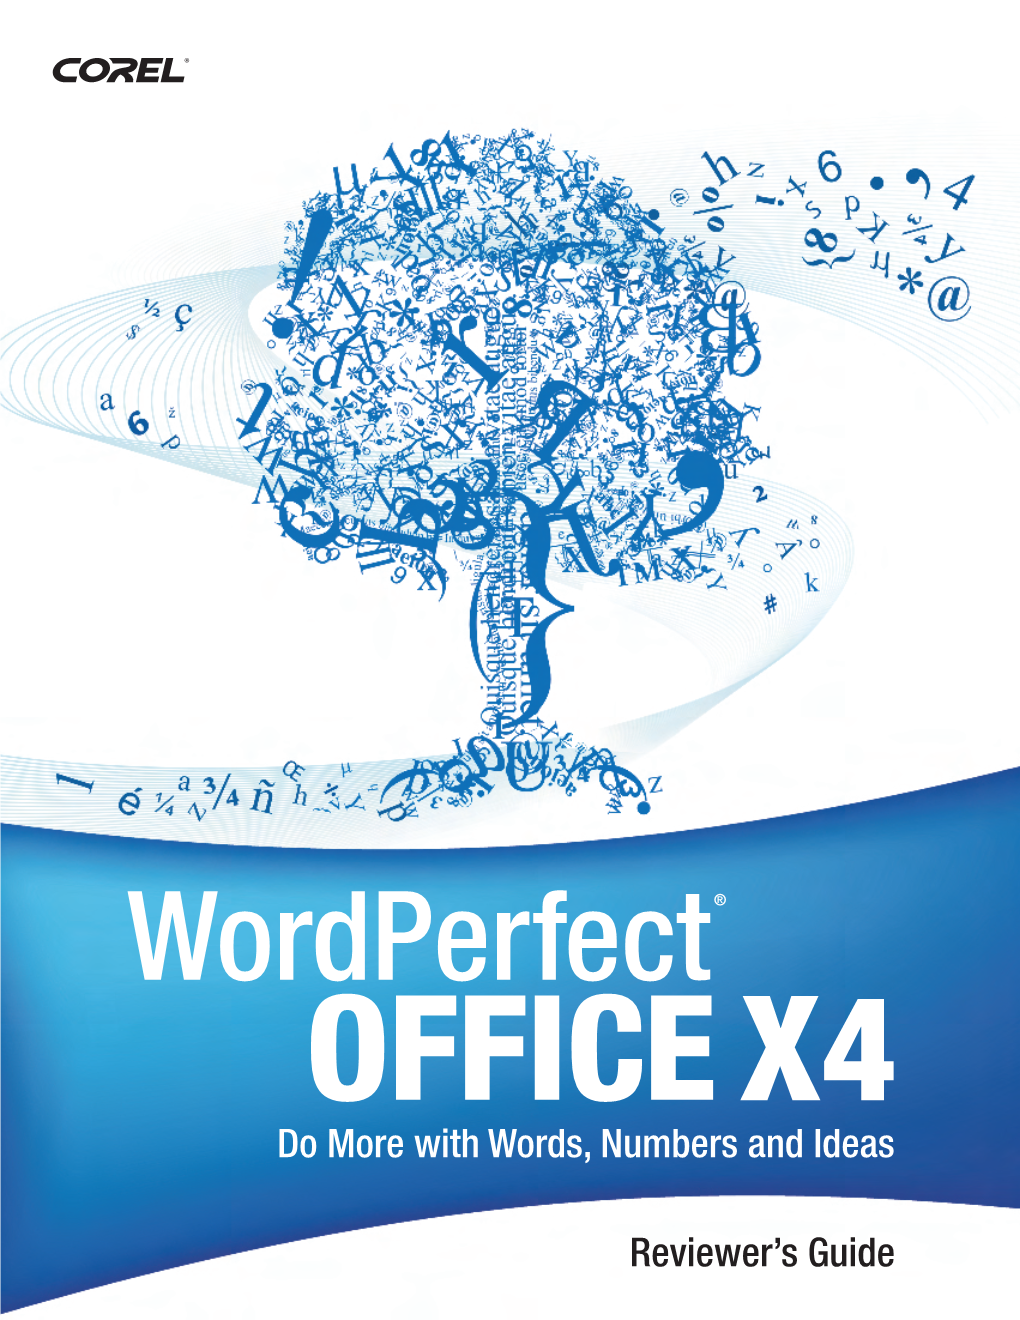 Corel Wordperfect Office X4 Reviewer's Guide